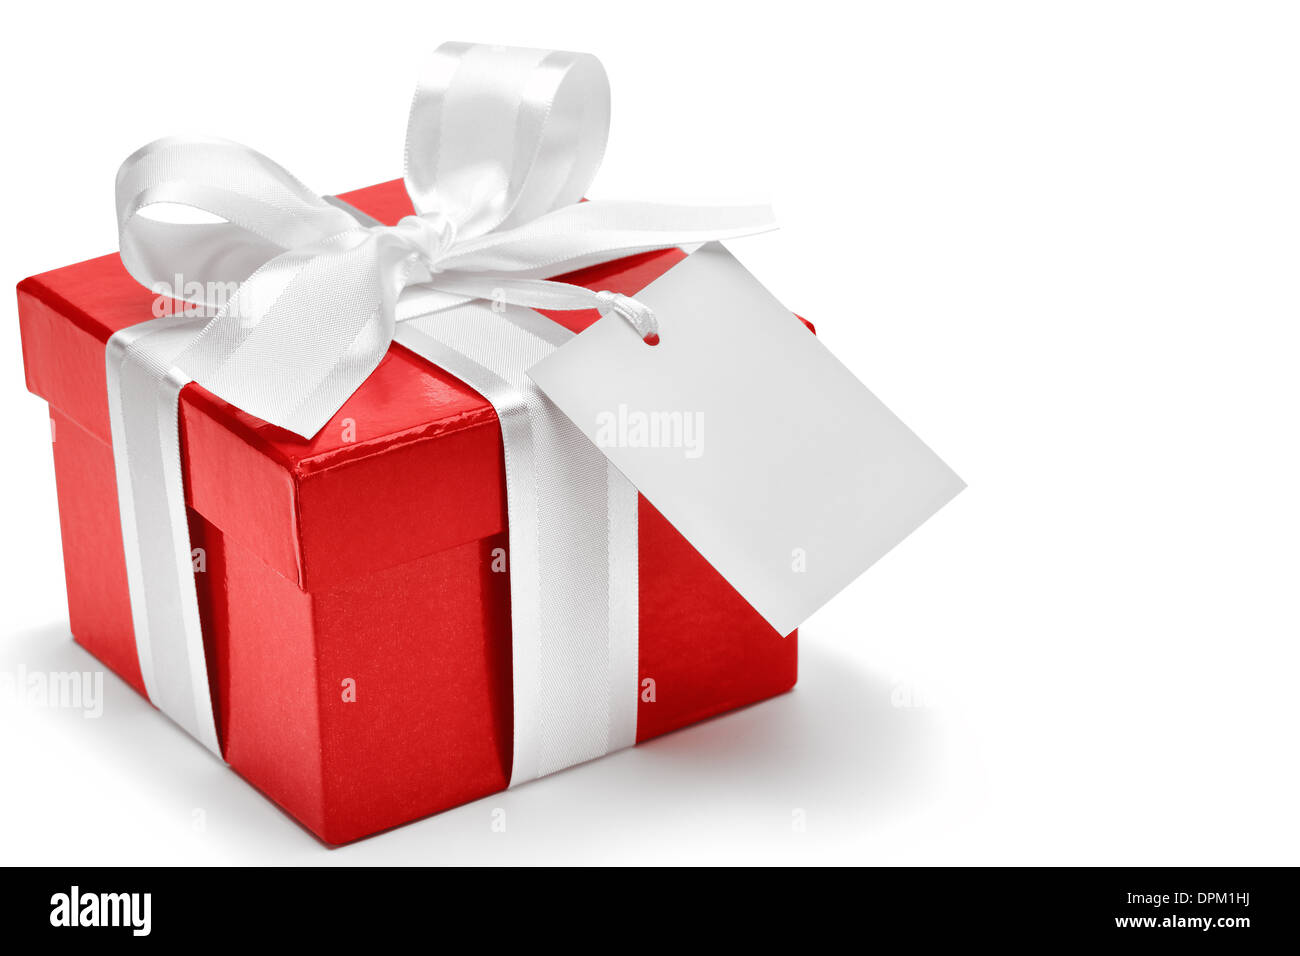 Red gift box with white bow and tag Stock Photo